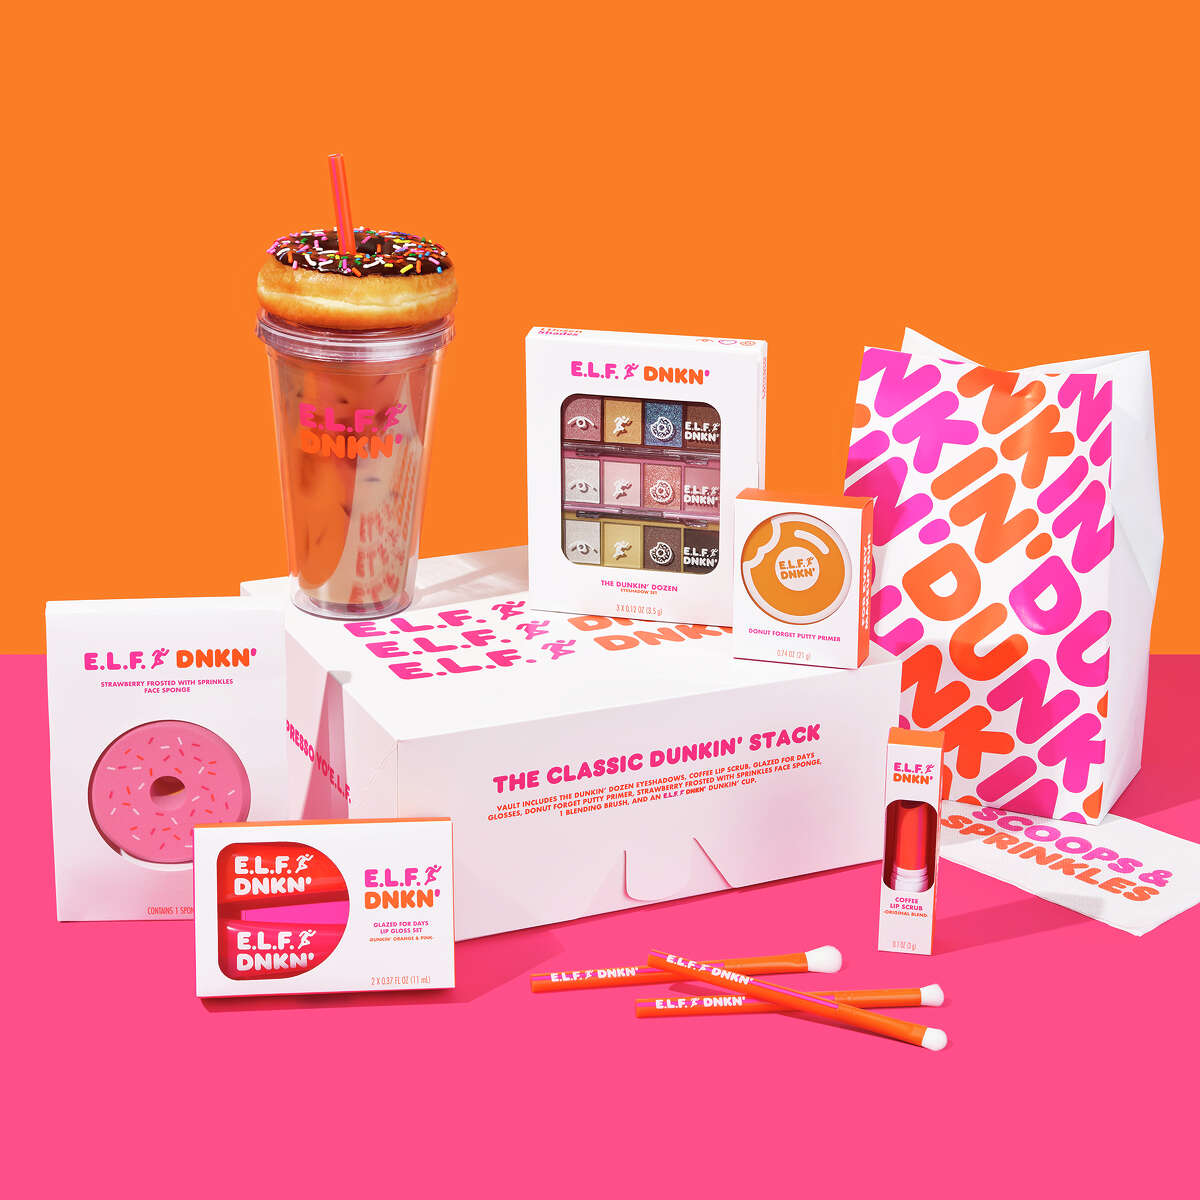 A look at the elf x Dunkin' collection.